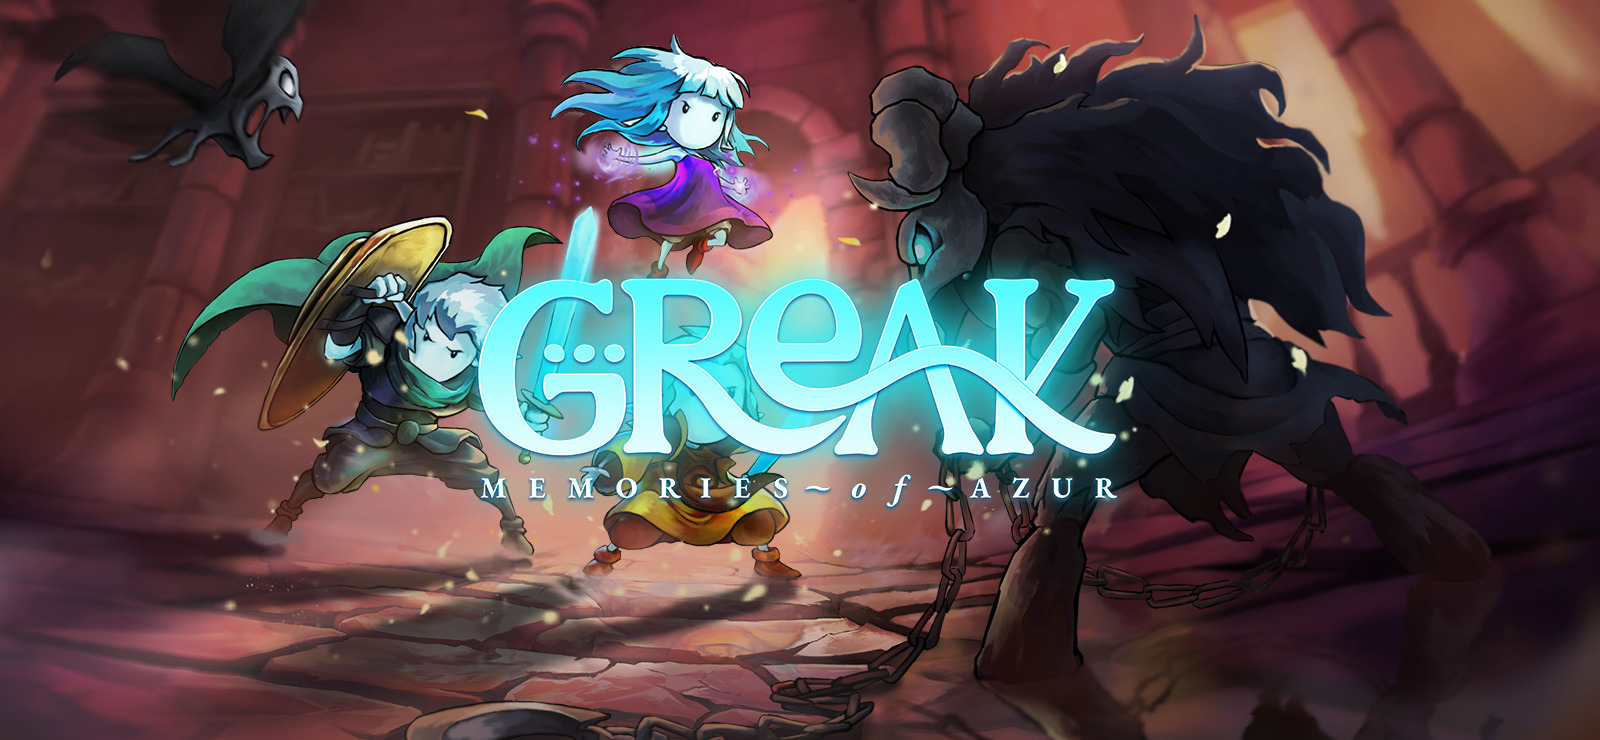 

Greak: Memories of Azur is a side scrolling single-player game with hand-drawn animatio